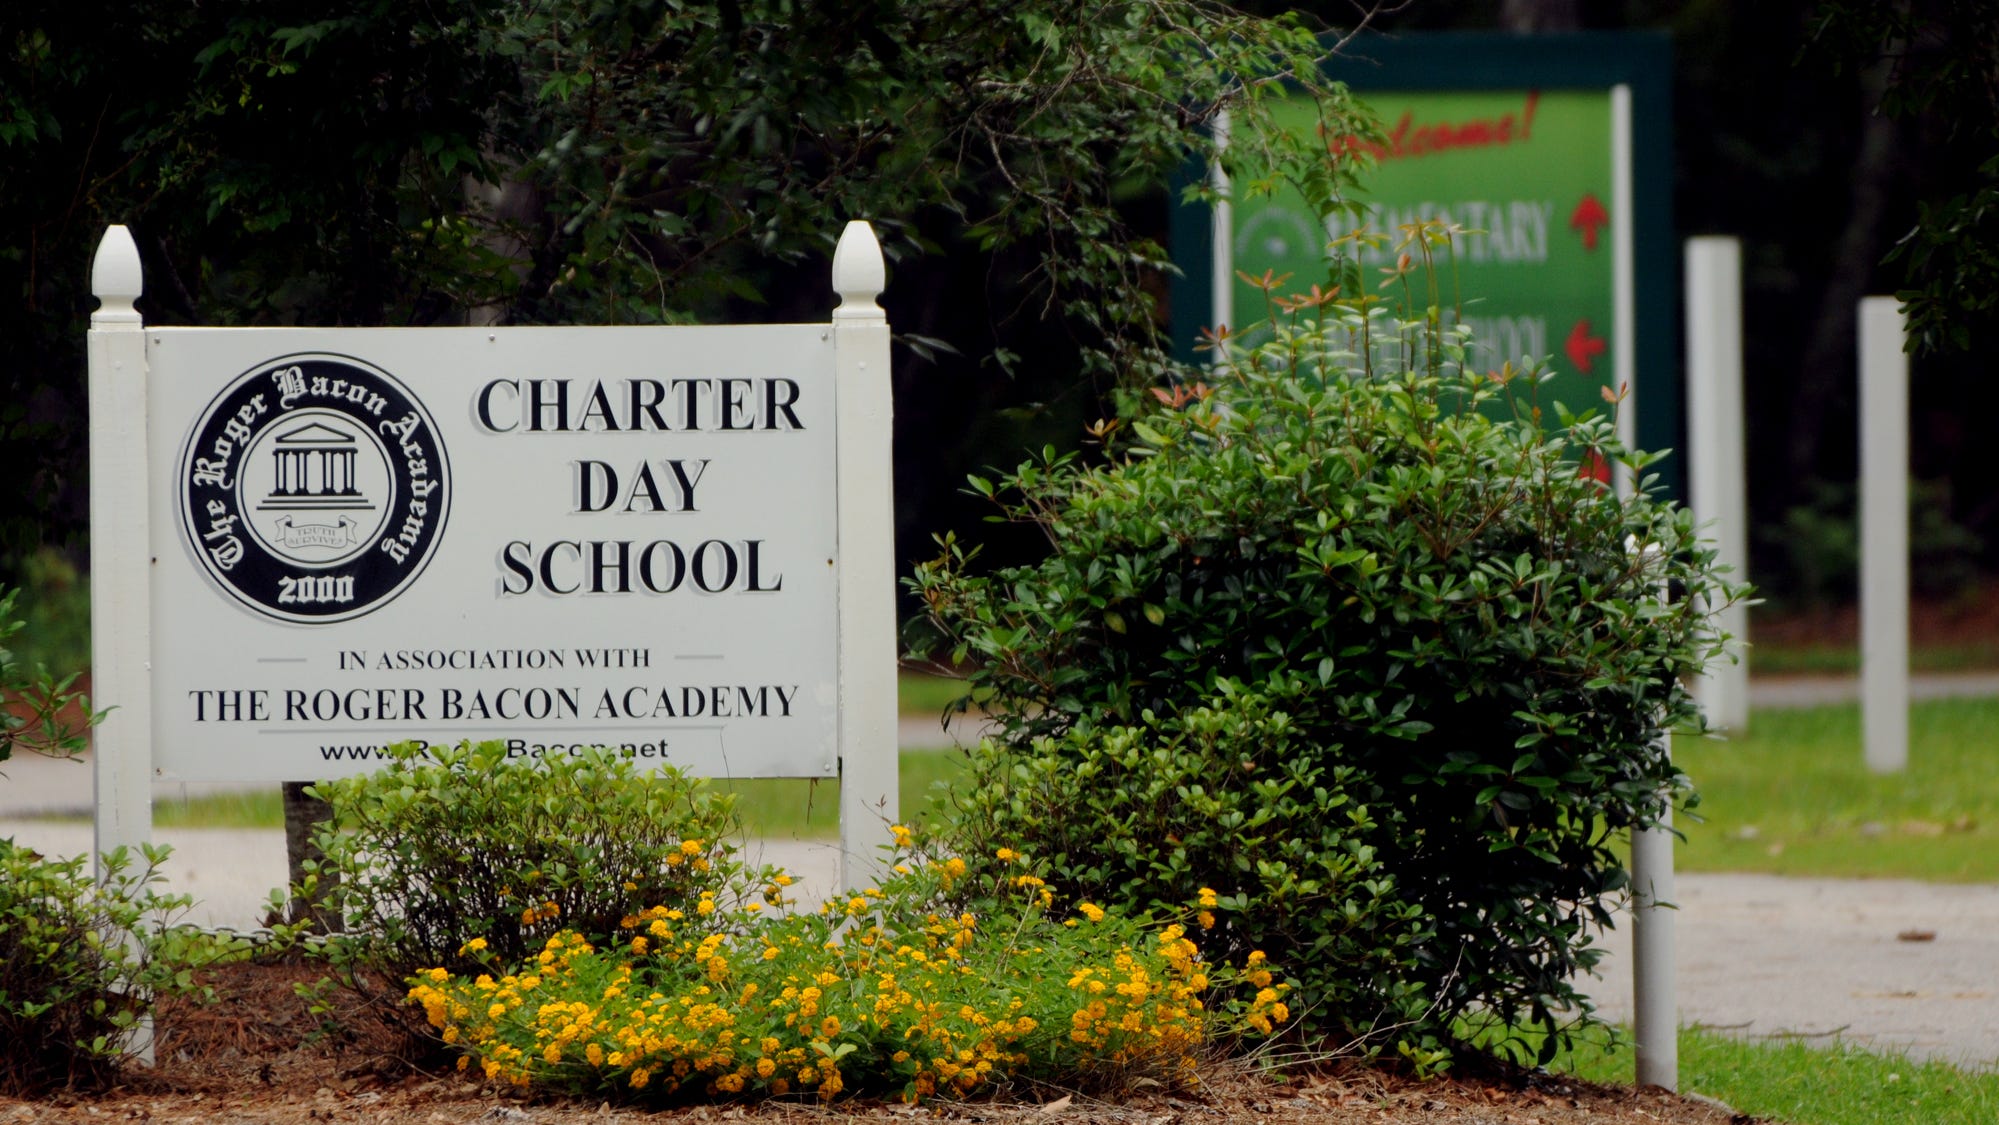 Leland charter school to appeal dress code lawsuit to Supreme Court